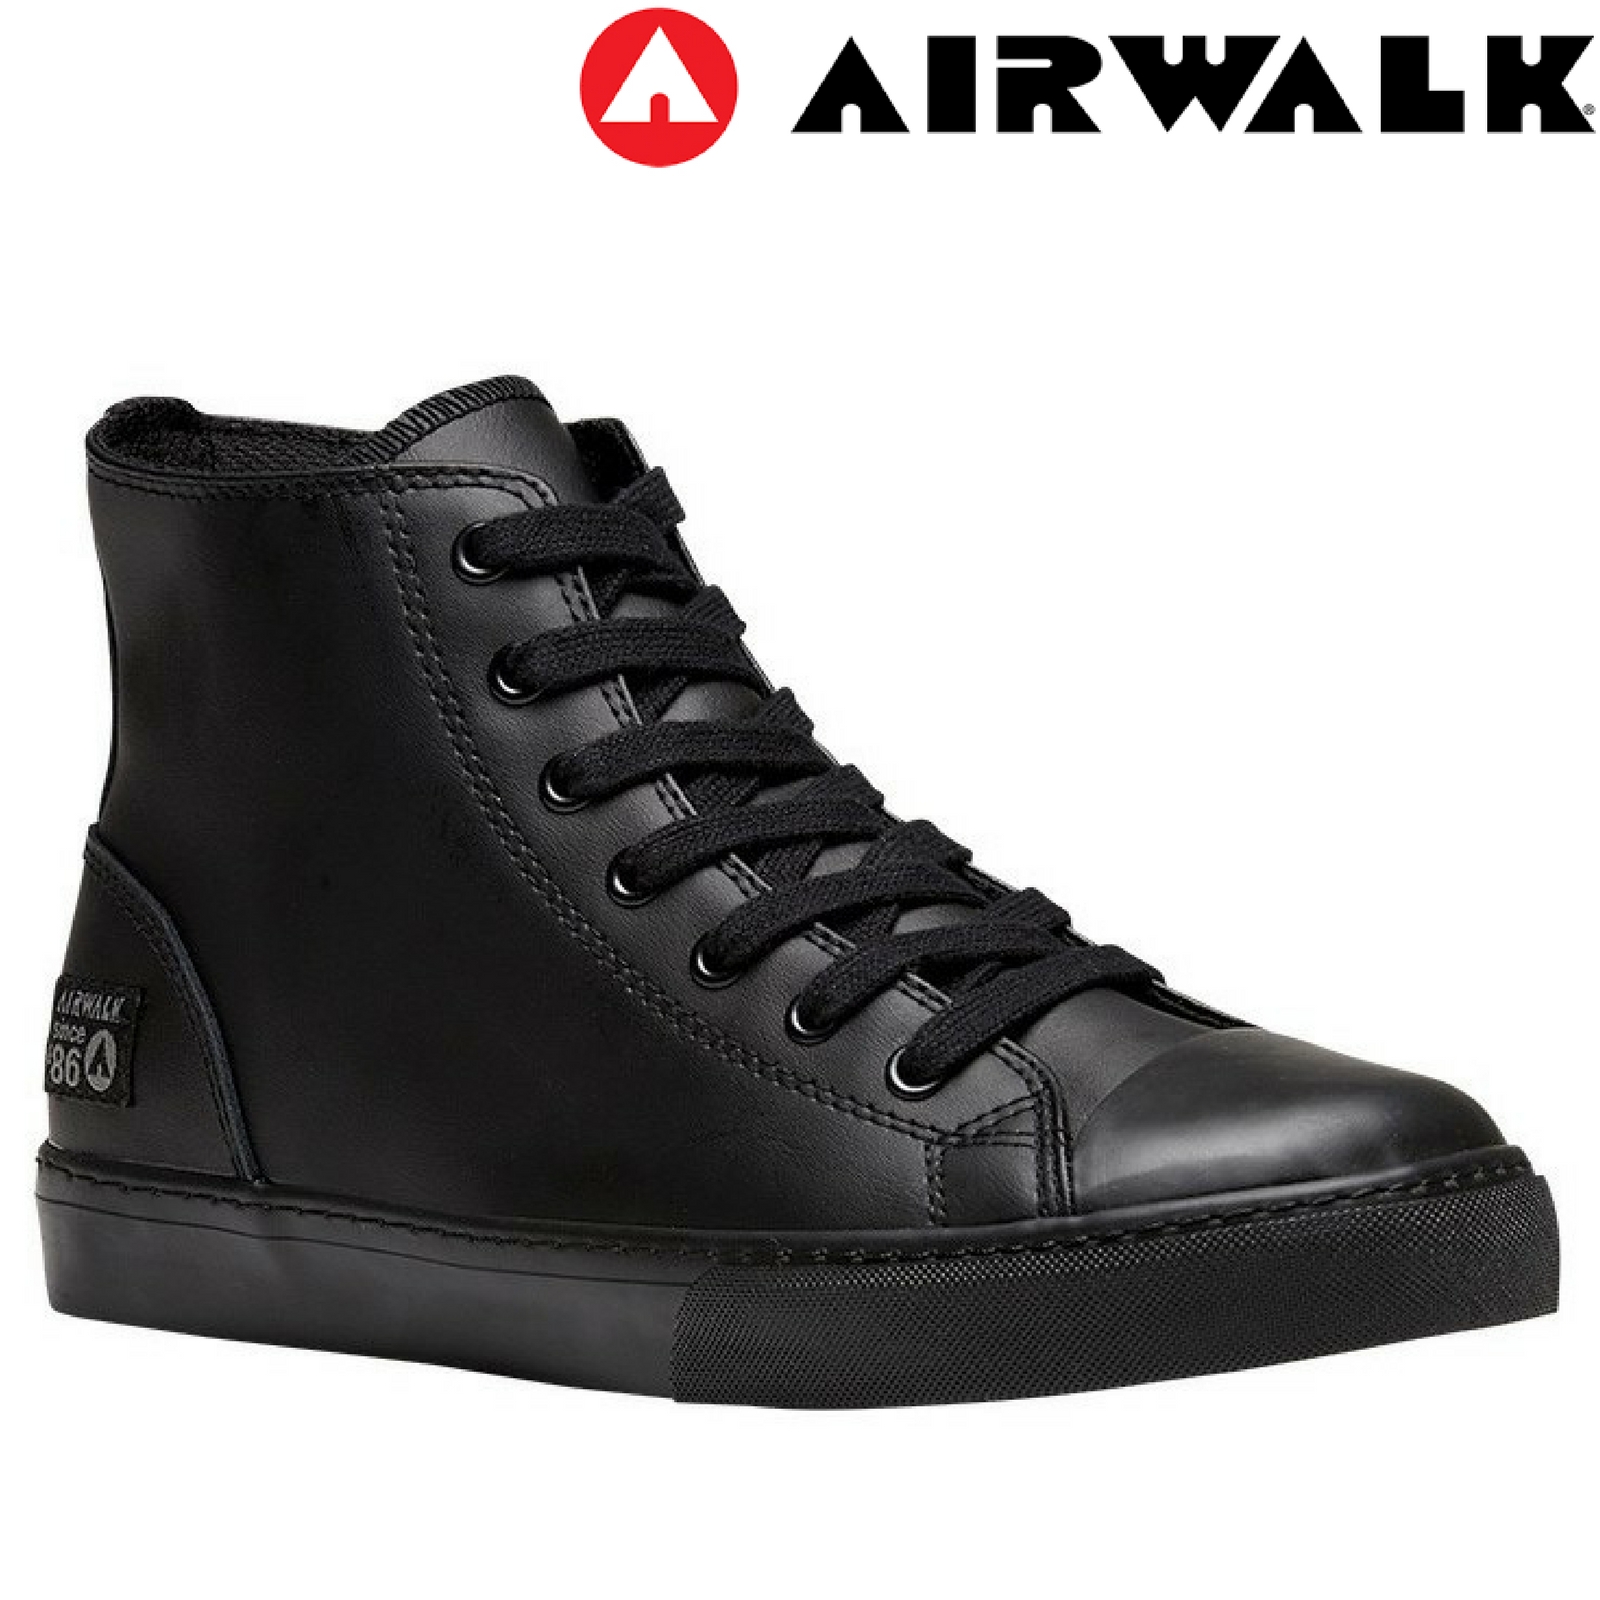 airwalk leather shoes